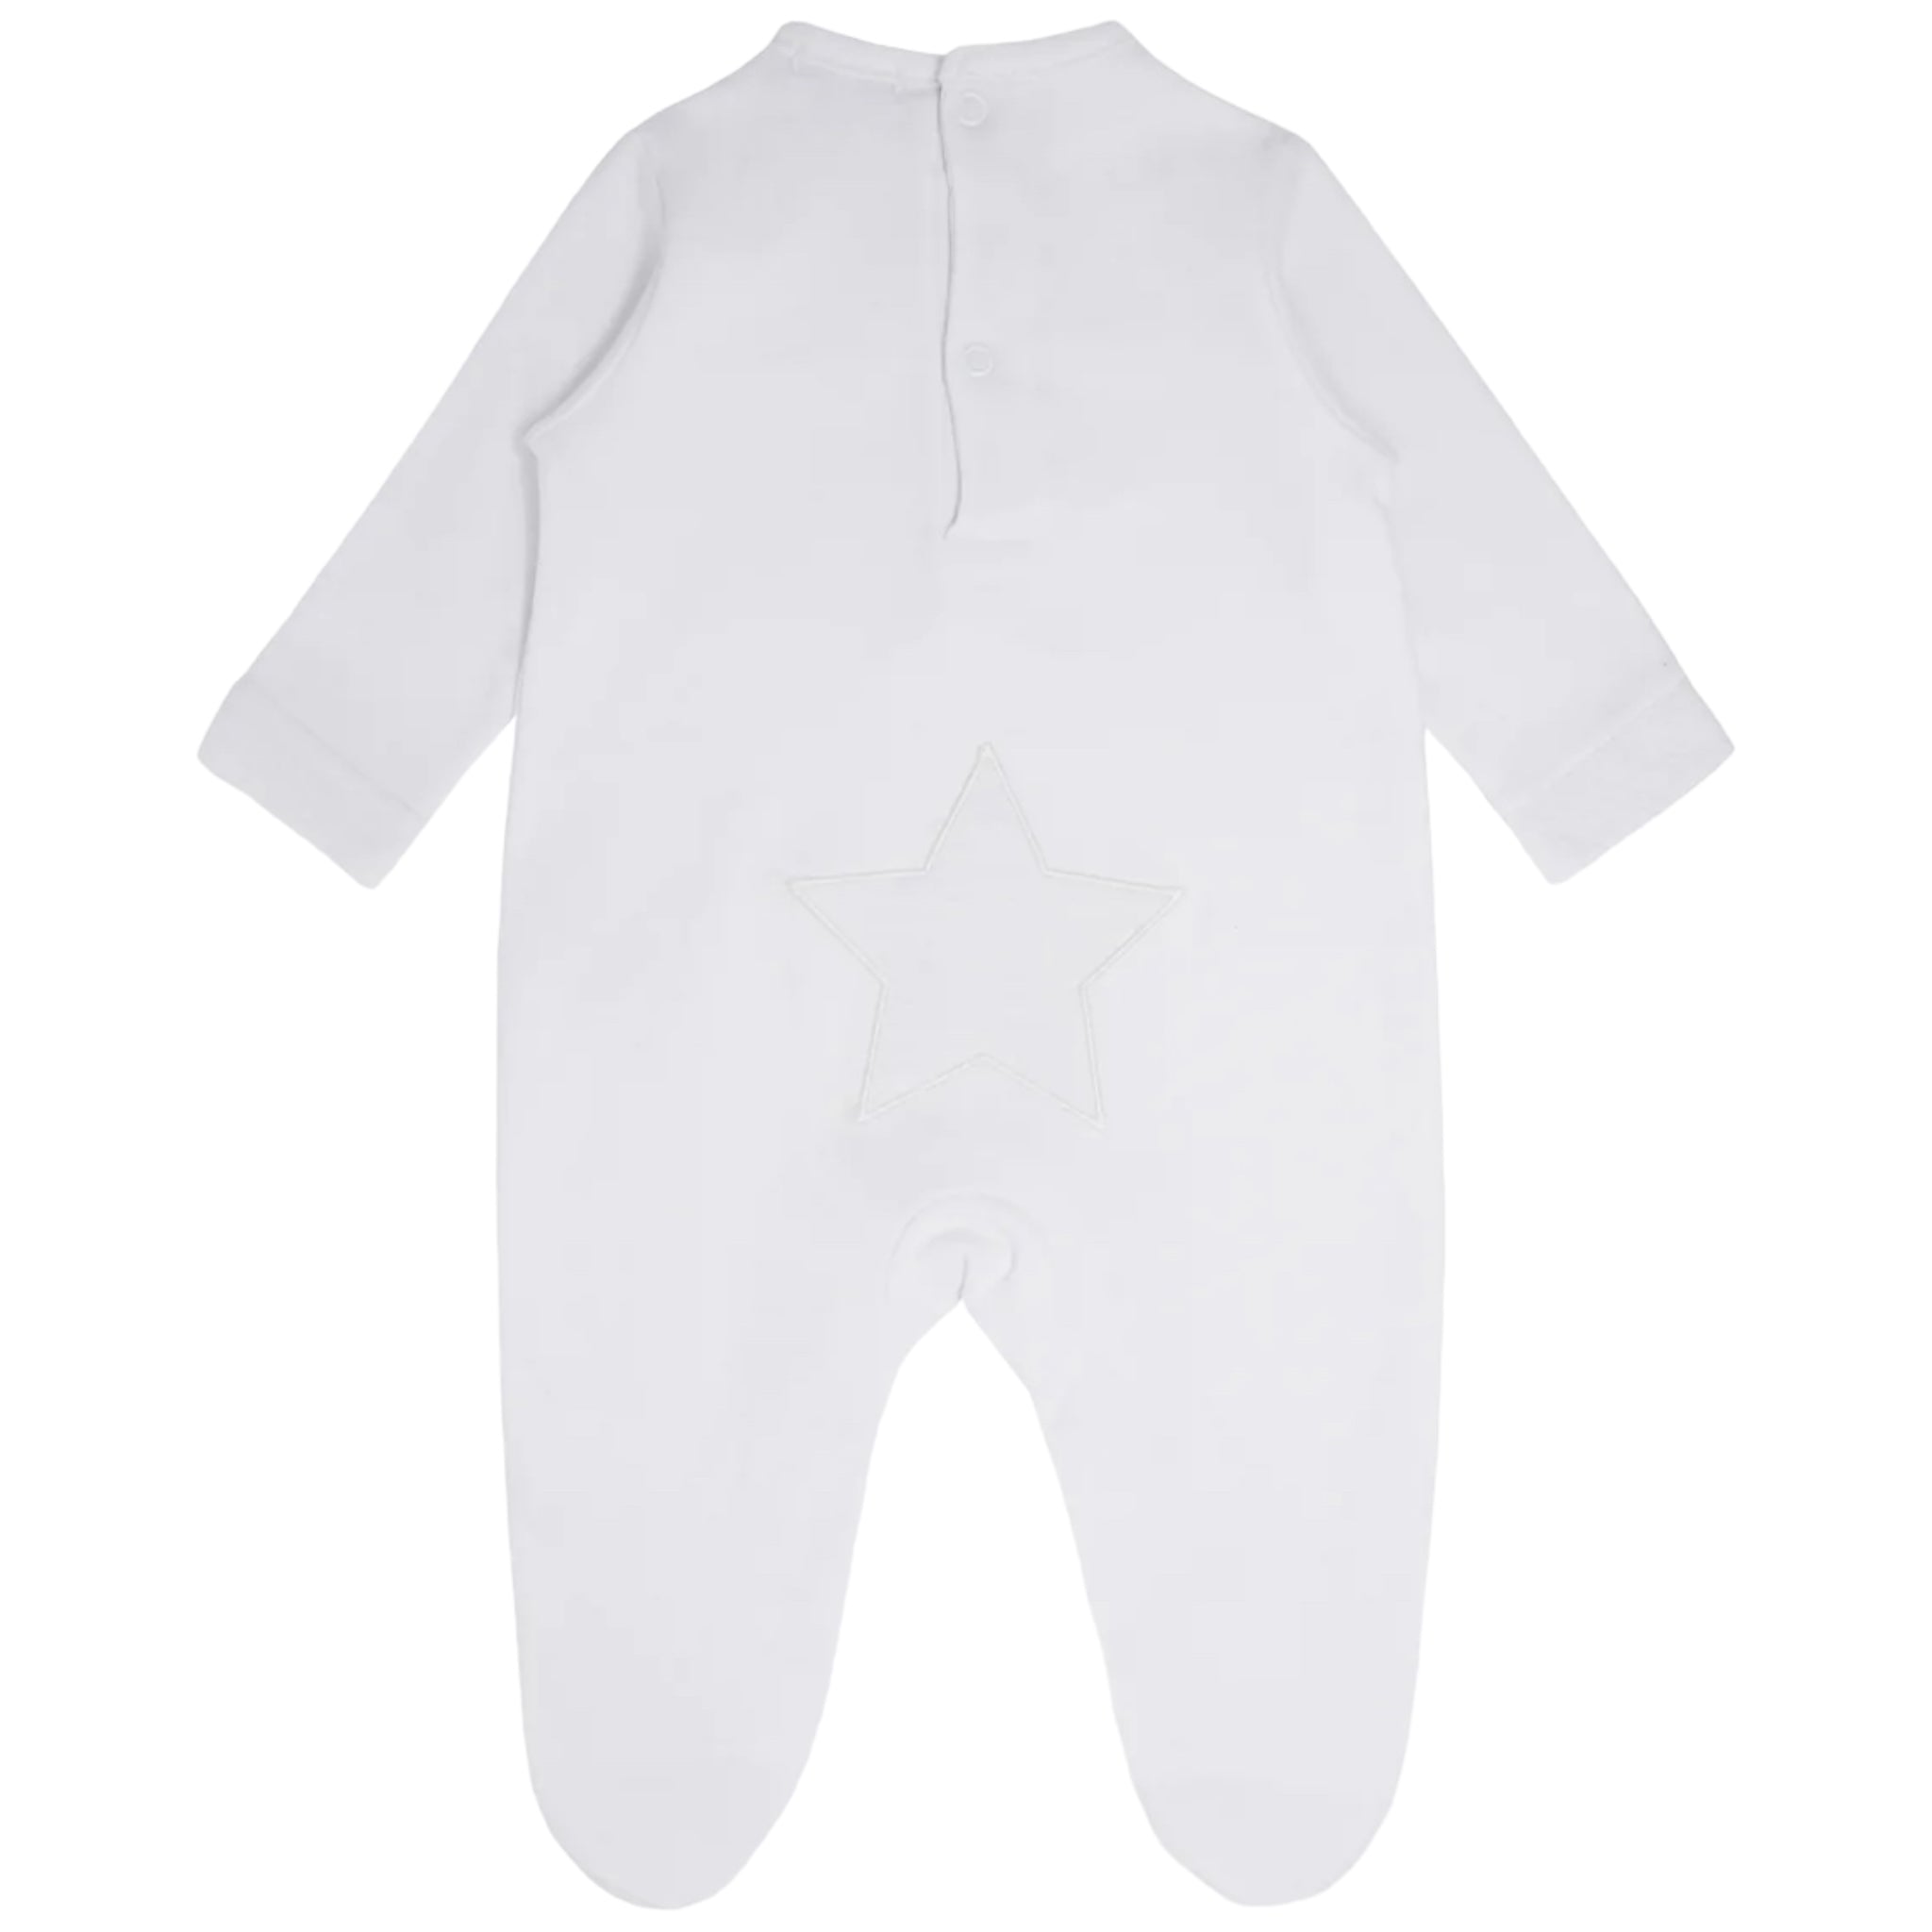 Blues Baby White Classic Cotton Babygrow with Star Detail Embroidery